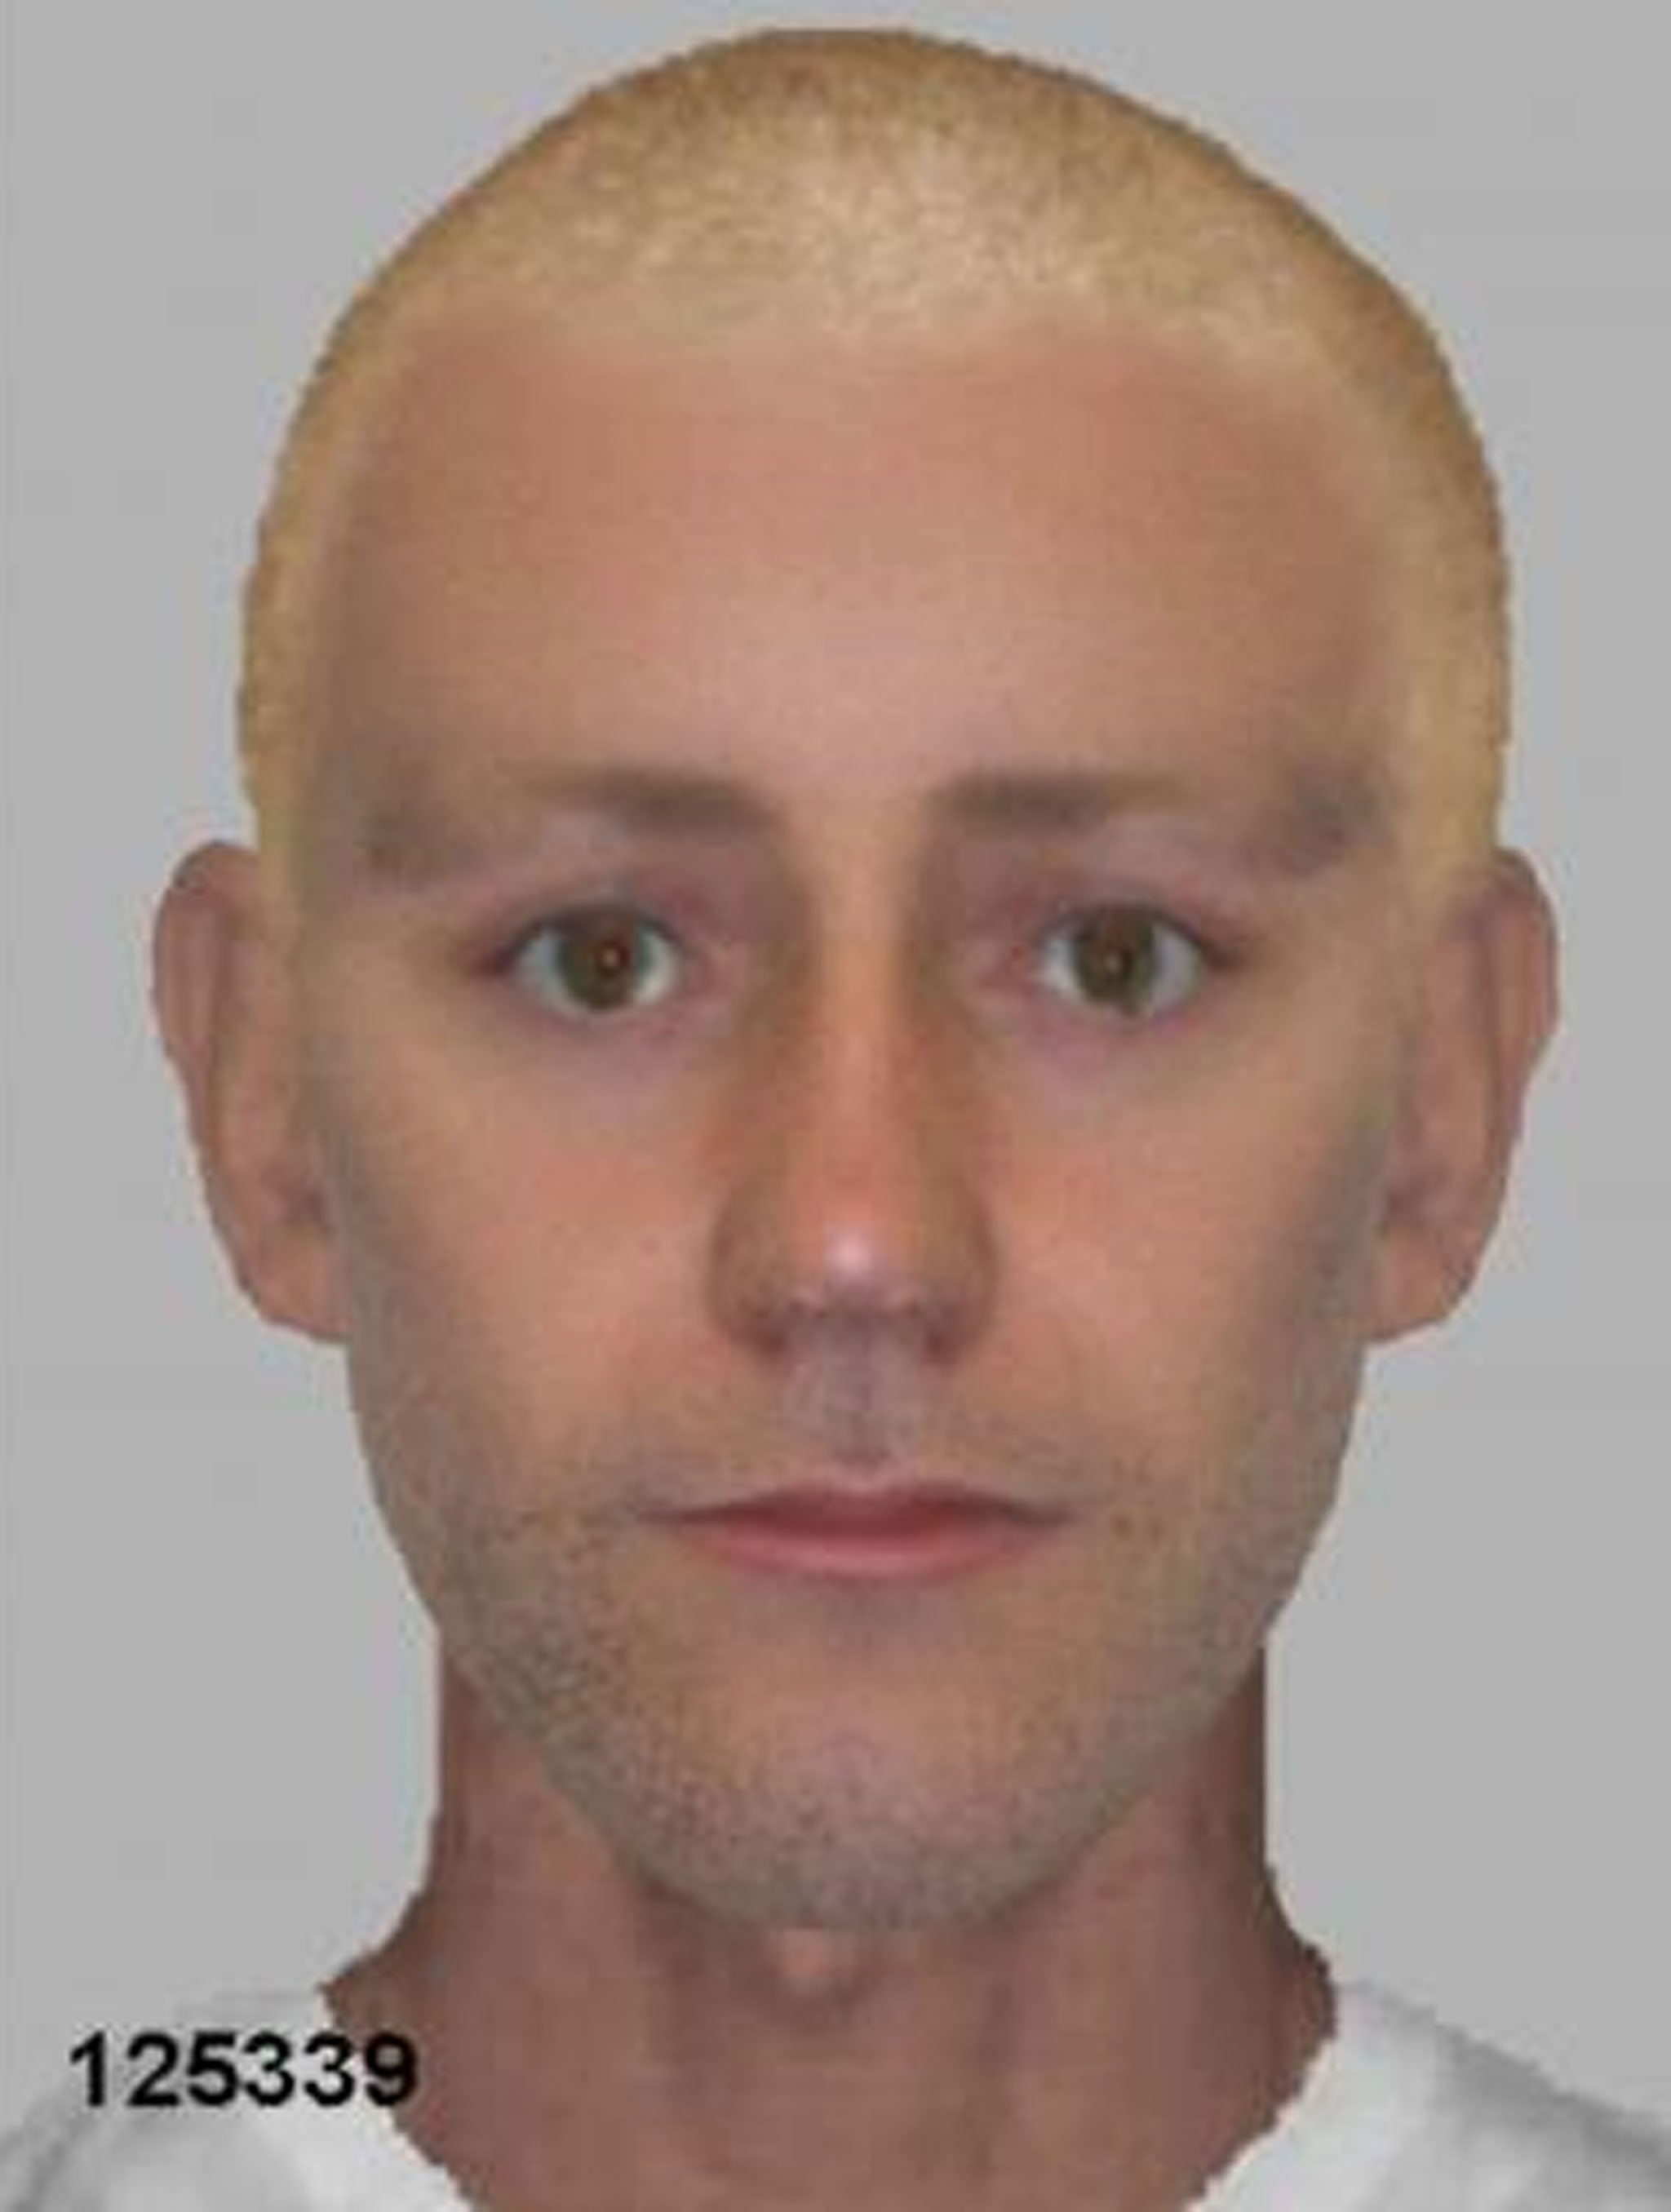 Police have released an e-fit of a man they suspect of sexually assaulting a 21-year-old woman while she sunbathed in a London park